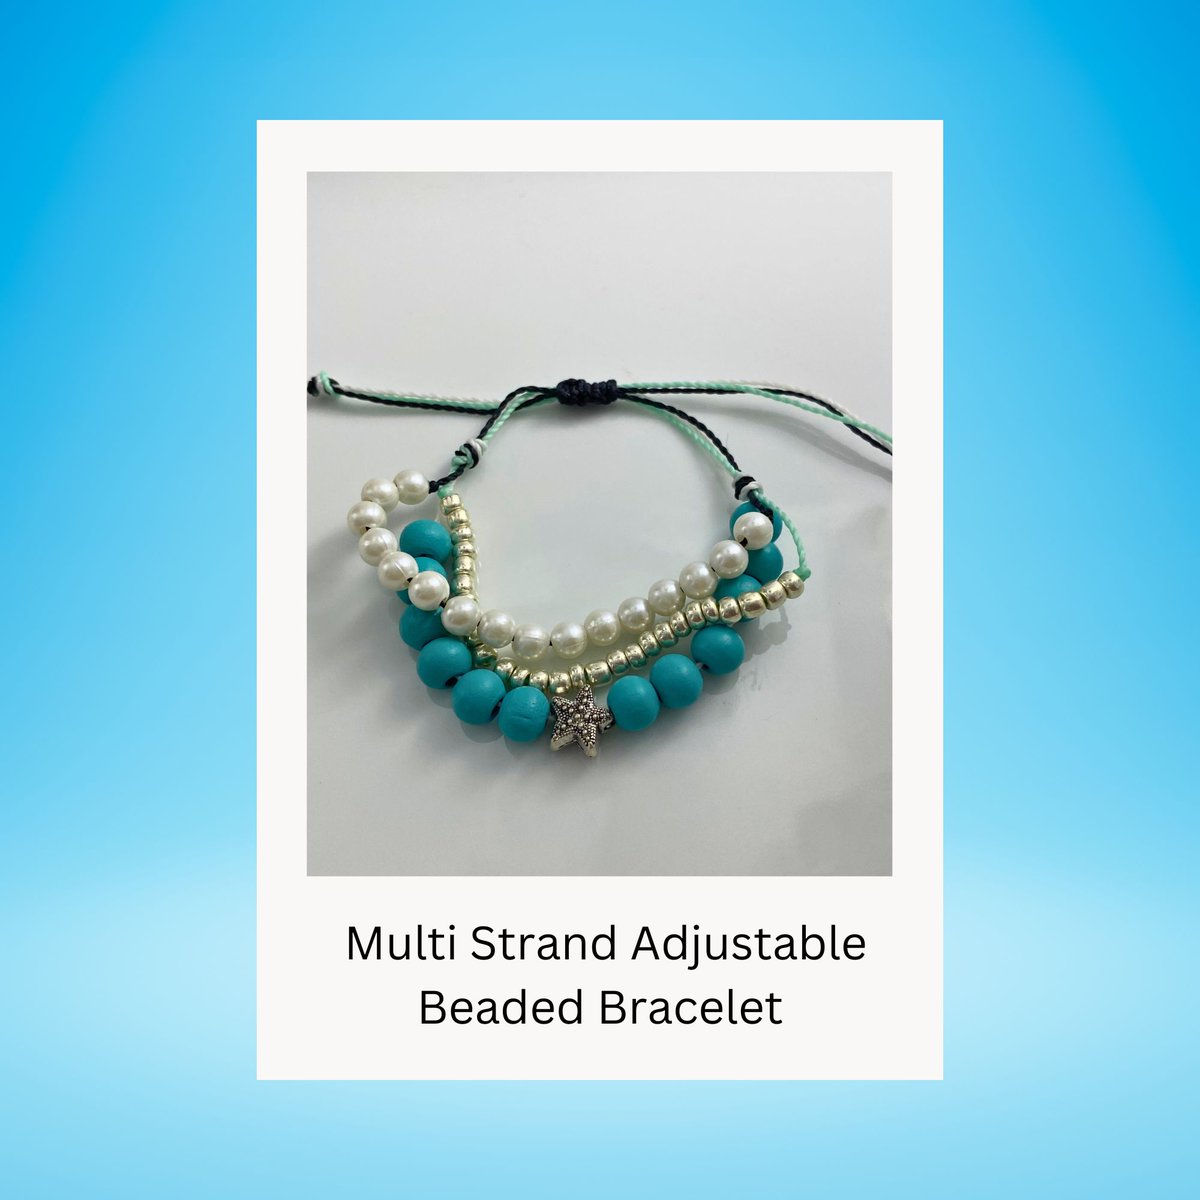 Handcrafted with love, this Adjustable Friendship Bracelet is the perfect addition to your collection.  Discover the charm of the sea with our Starfish Teal design.
Visit us at Starfishbykristan.com
#SeedBeadBracelet #AdjustableBracelet #BohoJewelry #FriendshipBracelet